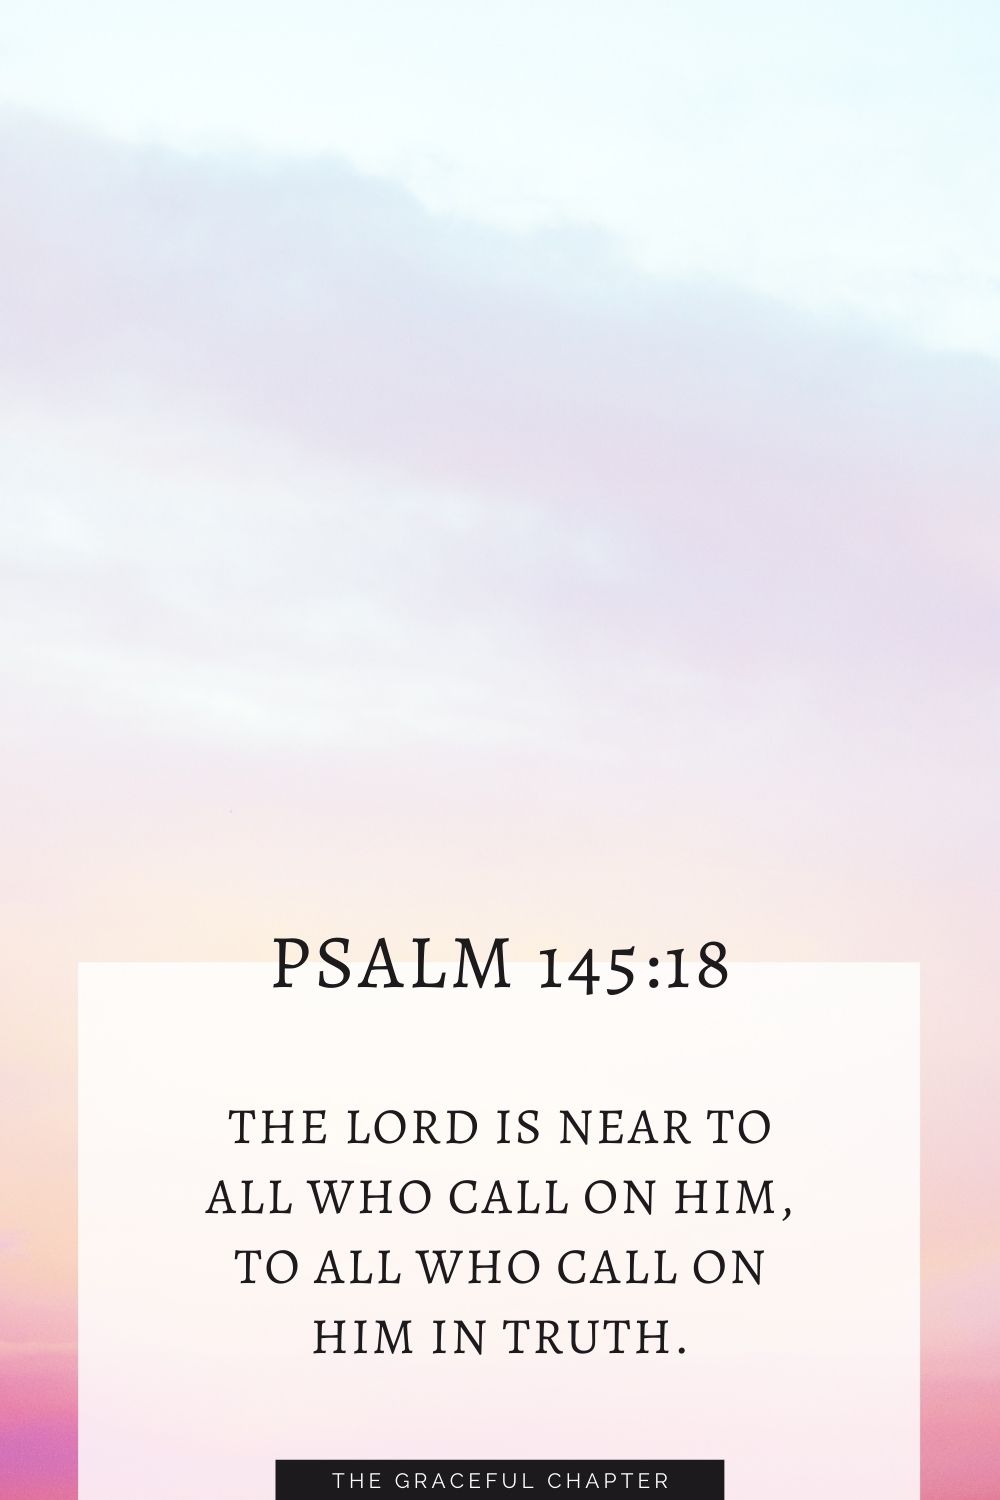 The Lord is near to all who call on him, to all who call on him in truth. Psalm 145:18